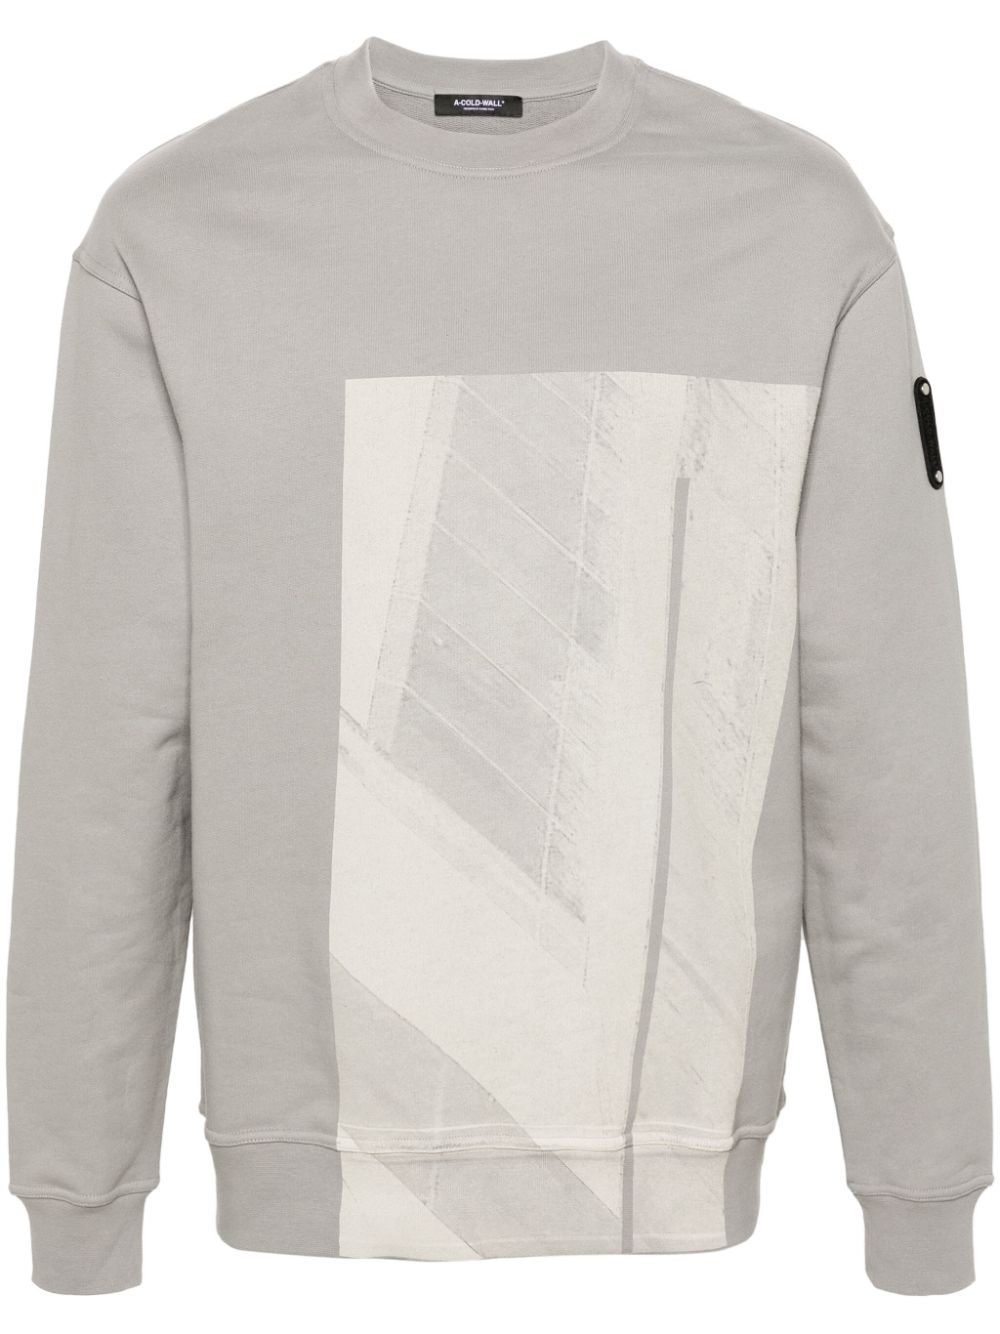 A-COLD-WALL* Stand cotton sweatshirt - Grey von A-COLD-WALL*